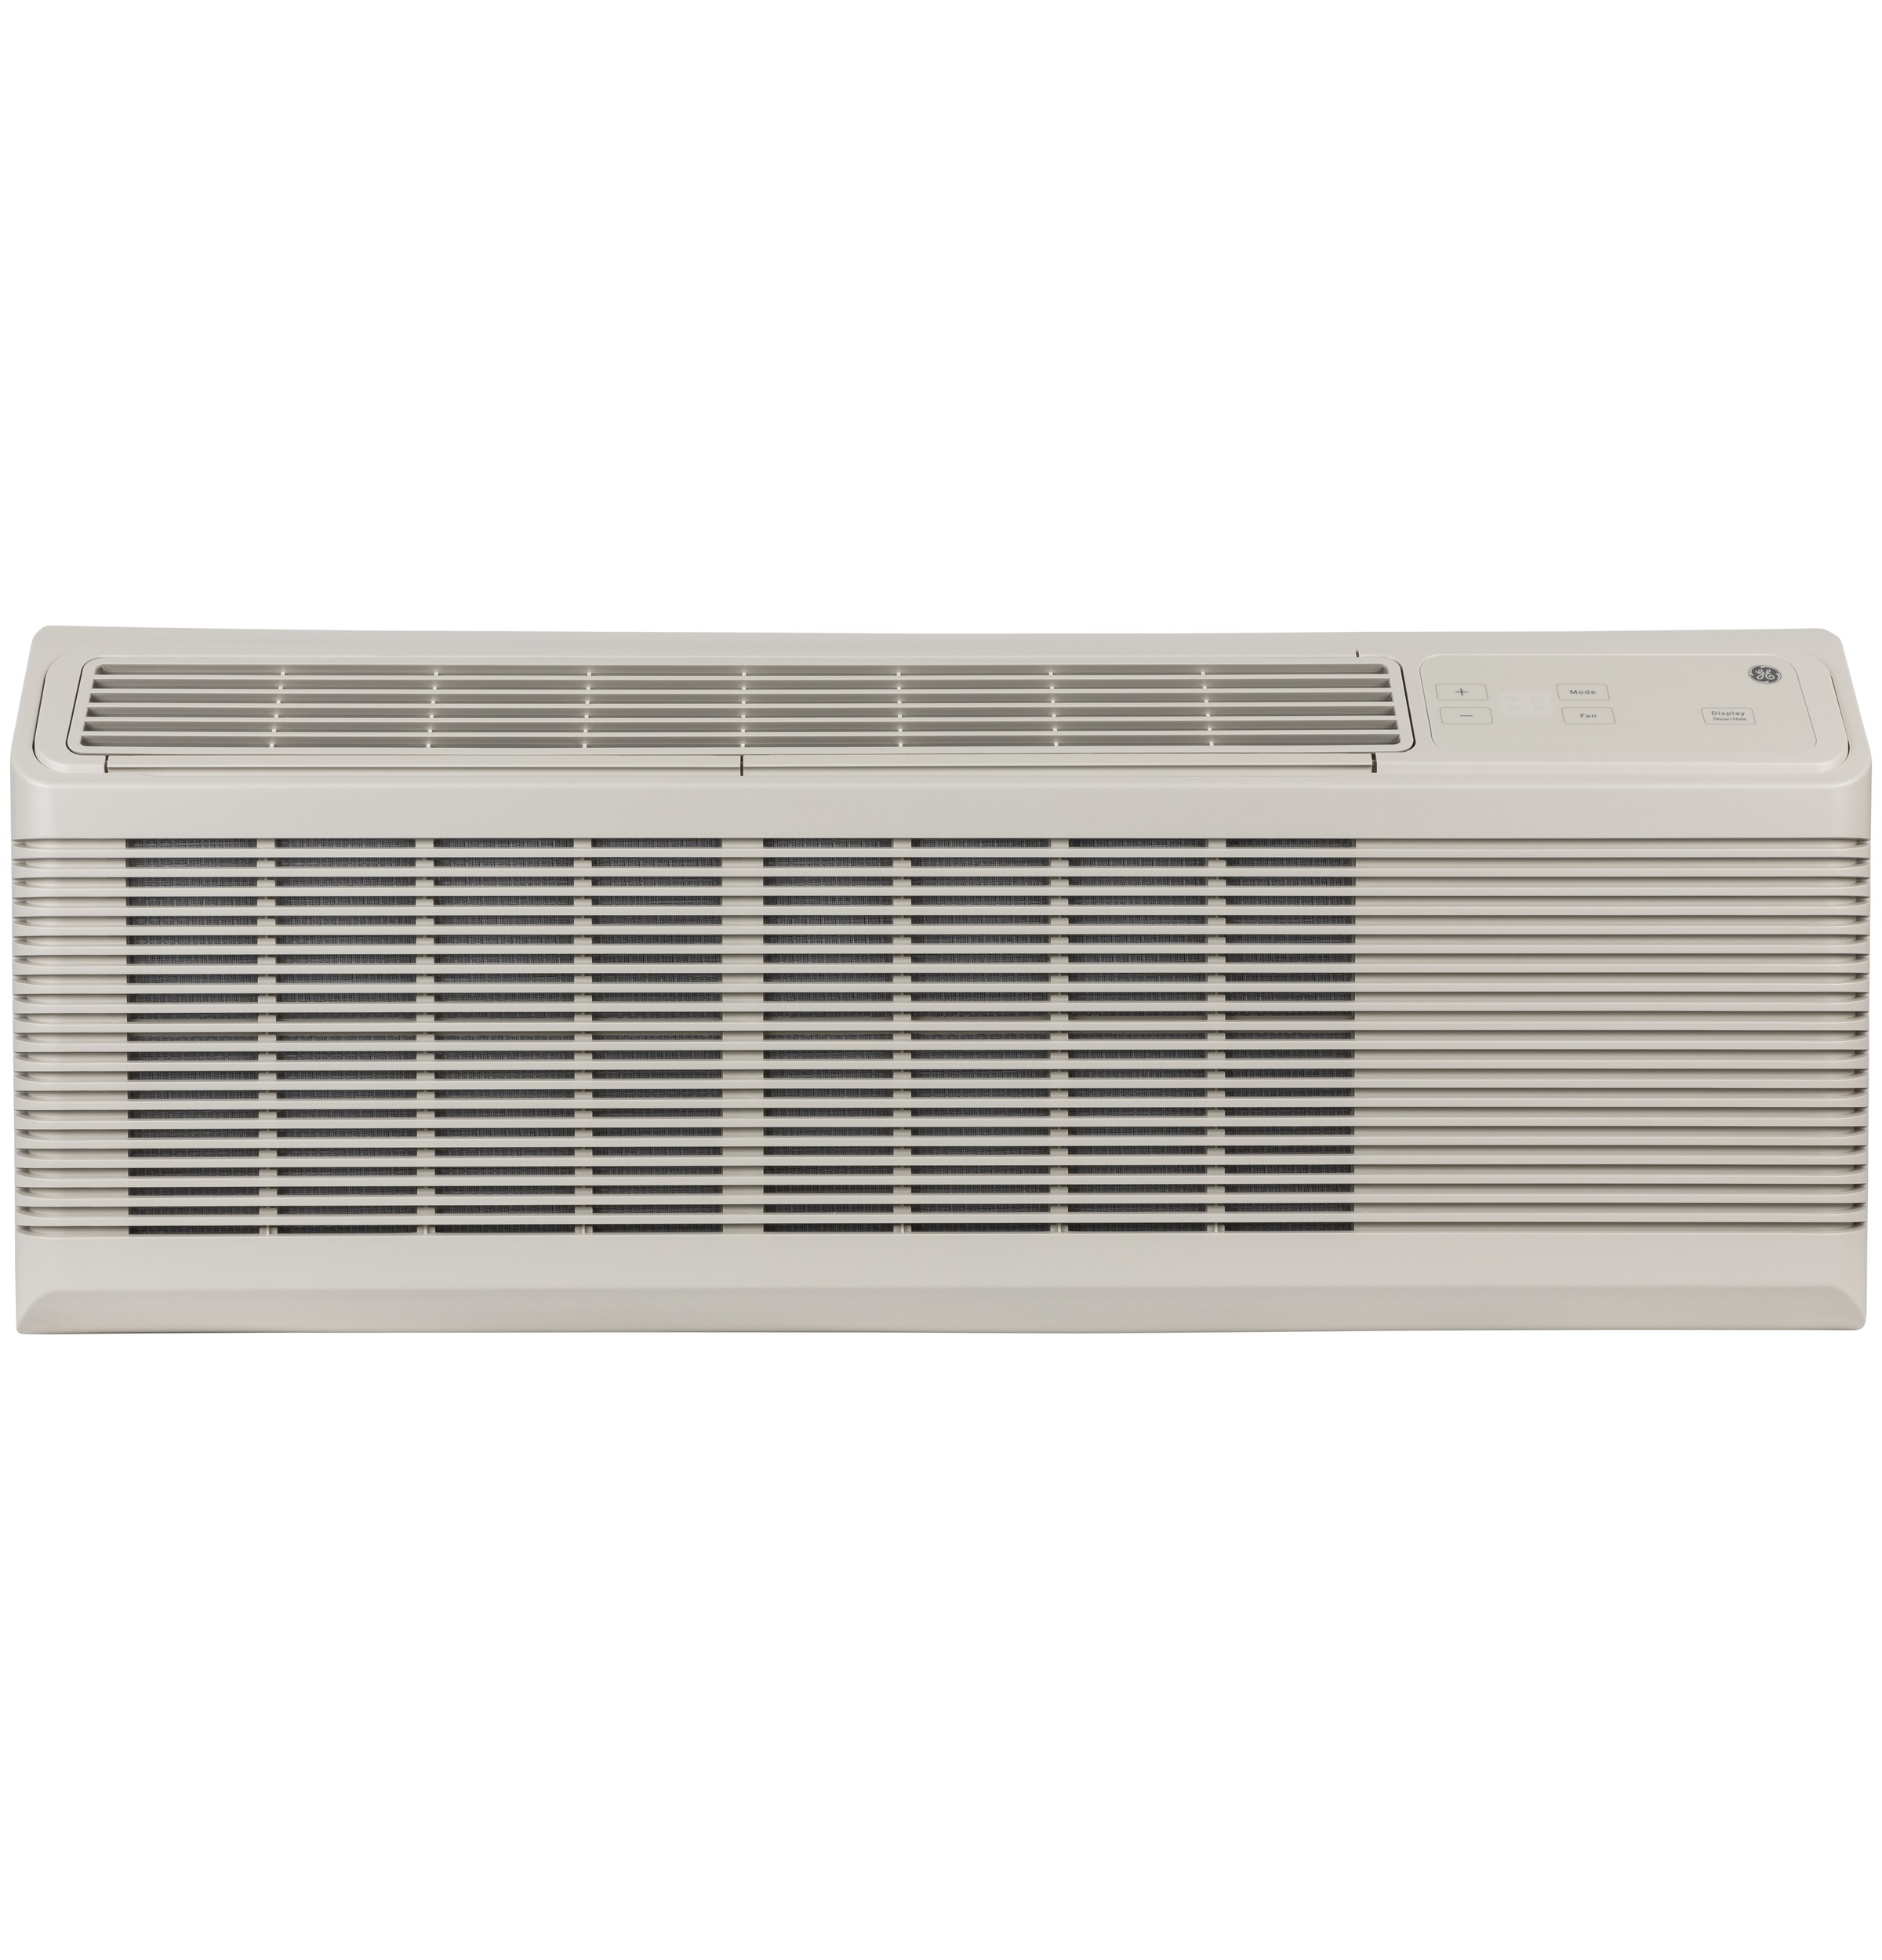 GE Zoneline® Dry Air 25 Cooling and Electric Heat Unit with Corrosion Protection, 265 Volt